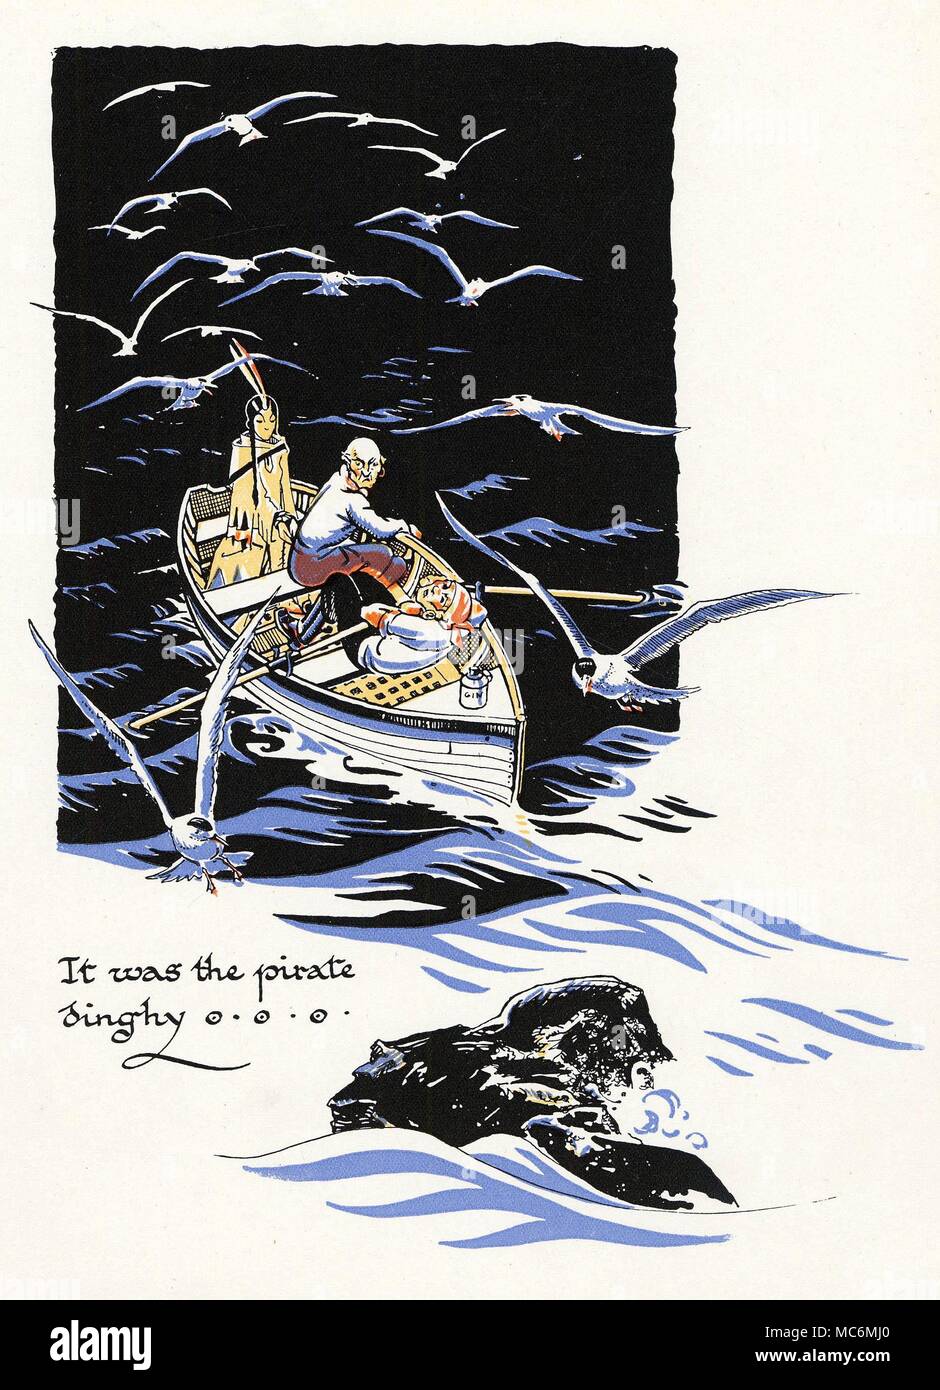 FAIRY TALES - PETER PAN Illustration by Gwynedd M. Hudson, for J.M. Barrie's Peter Pan and Wendy, no date, but circa 1930. 'It was the pirate dinghy.' The pirates arrive, with Smee and Starkey, and their captive, Tiger Lily. Stock Photo